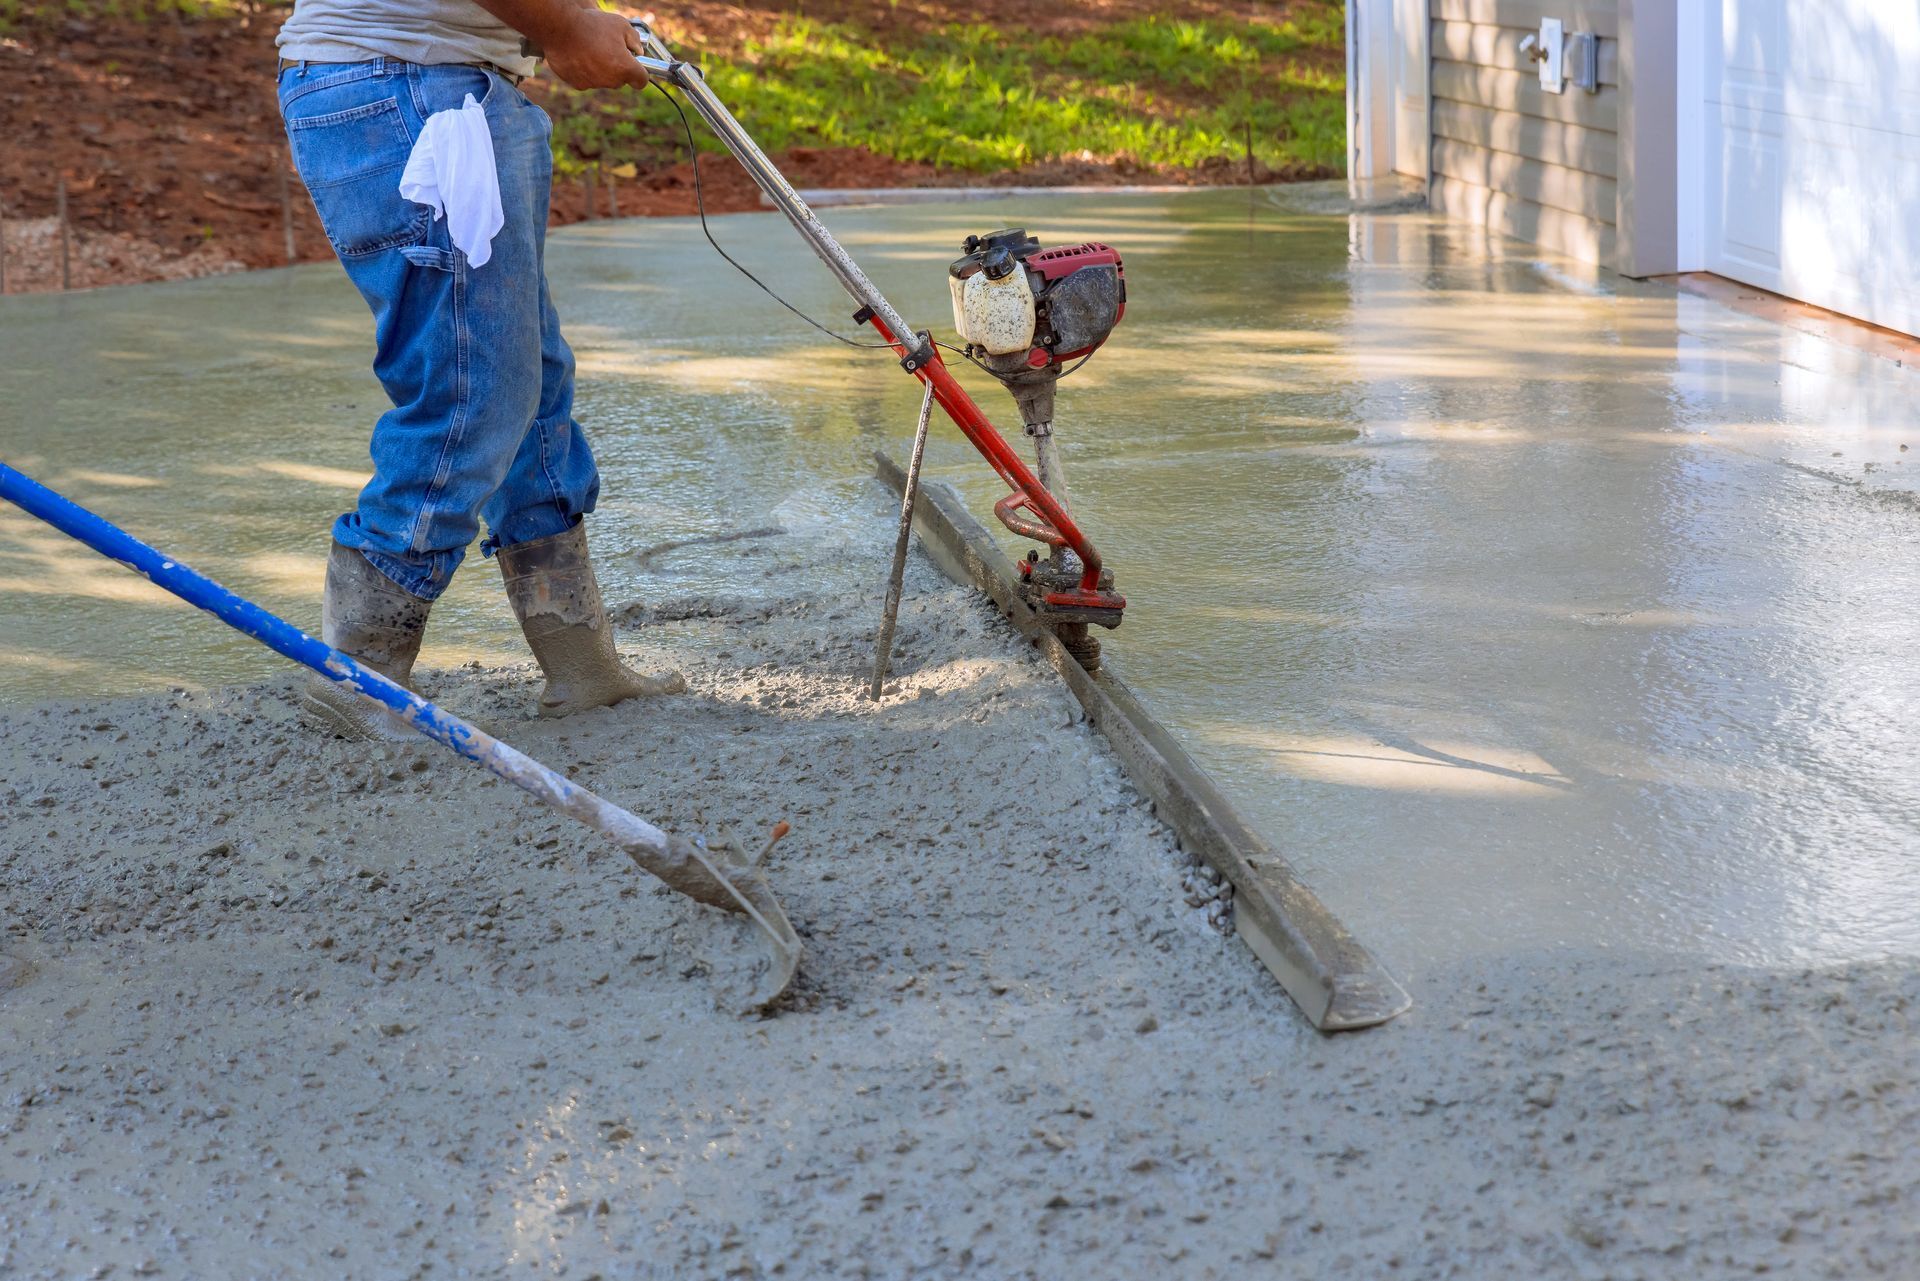 Worker smoothing a fresh concrete driveway with a power trowel in Pittsburgh, showcasing professional driveway installation.